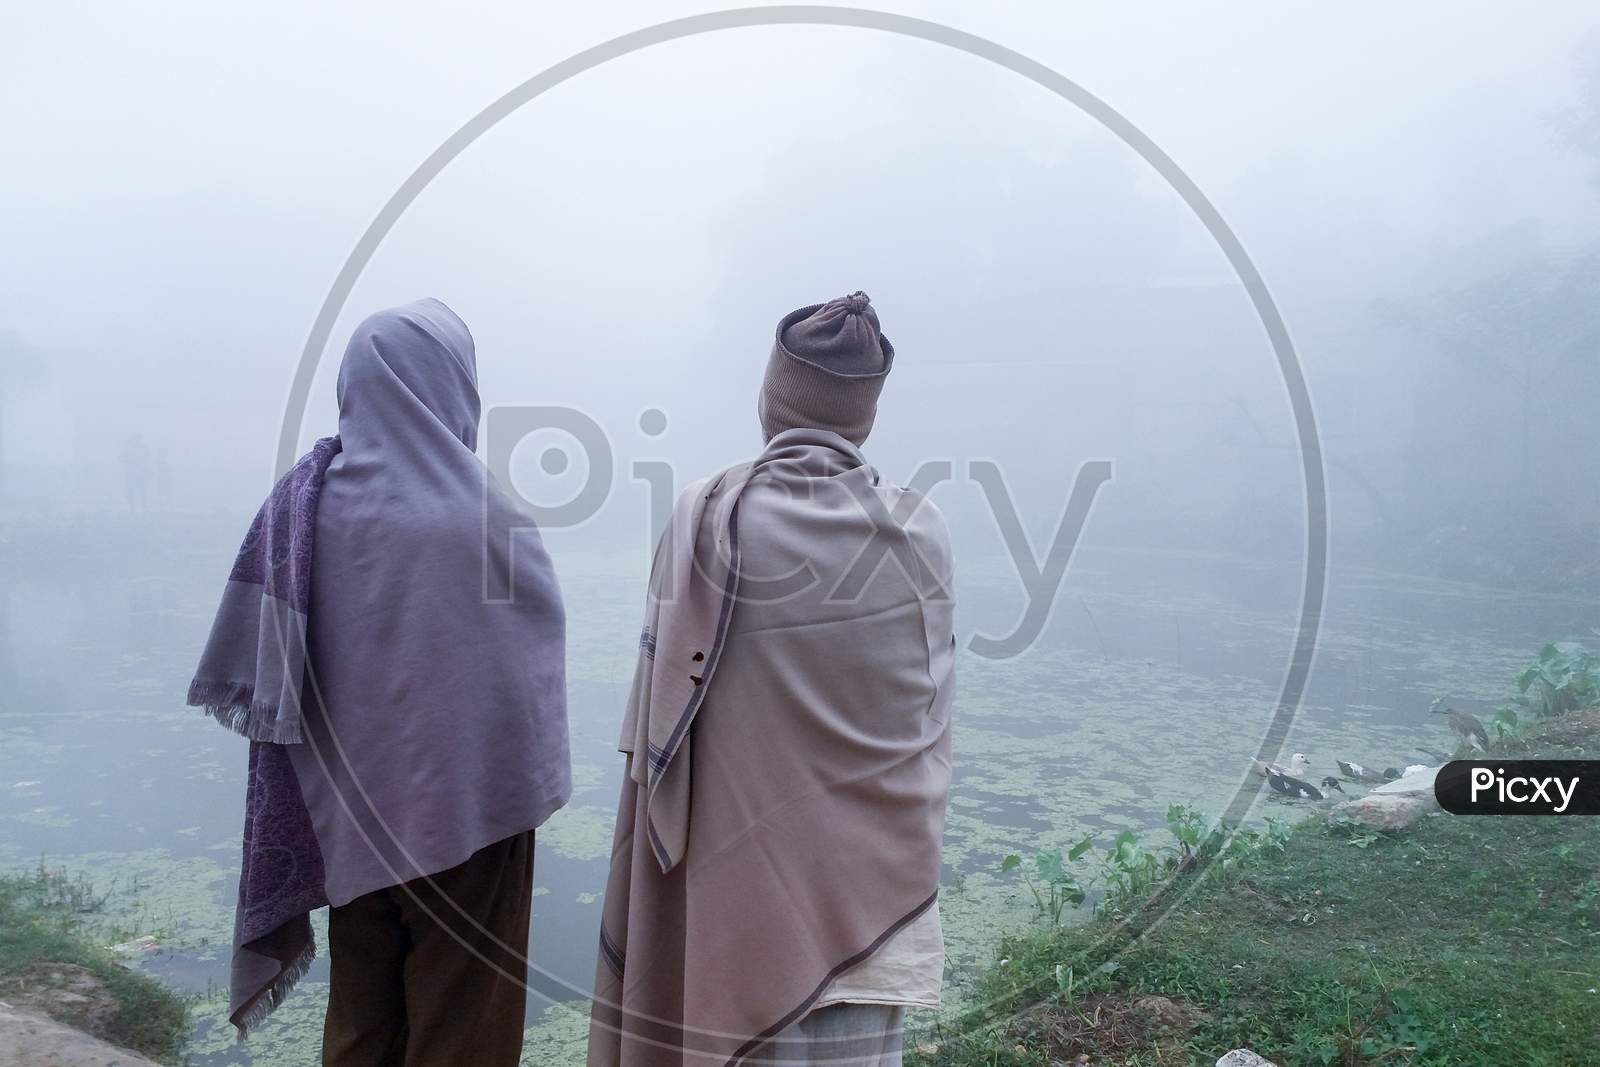 The Rural People Are Enjoying The Natural Beauty Of The Village In The Fog On A Winter Morning